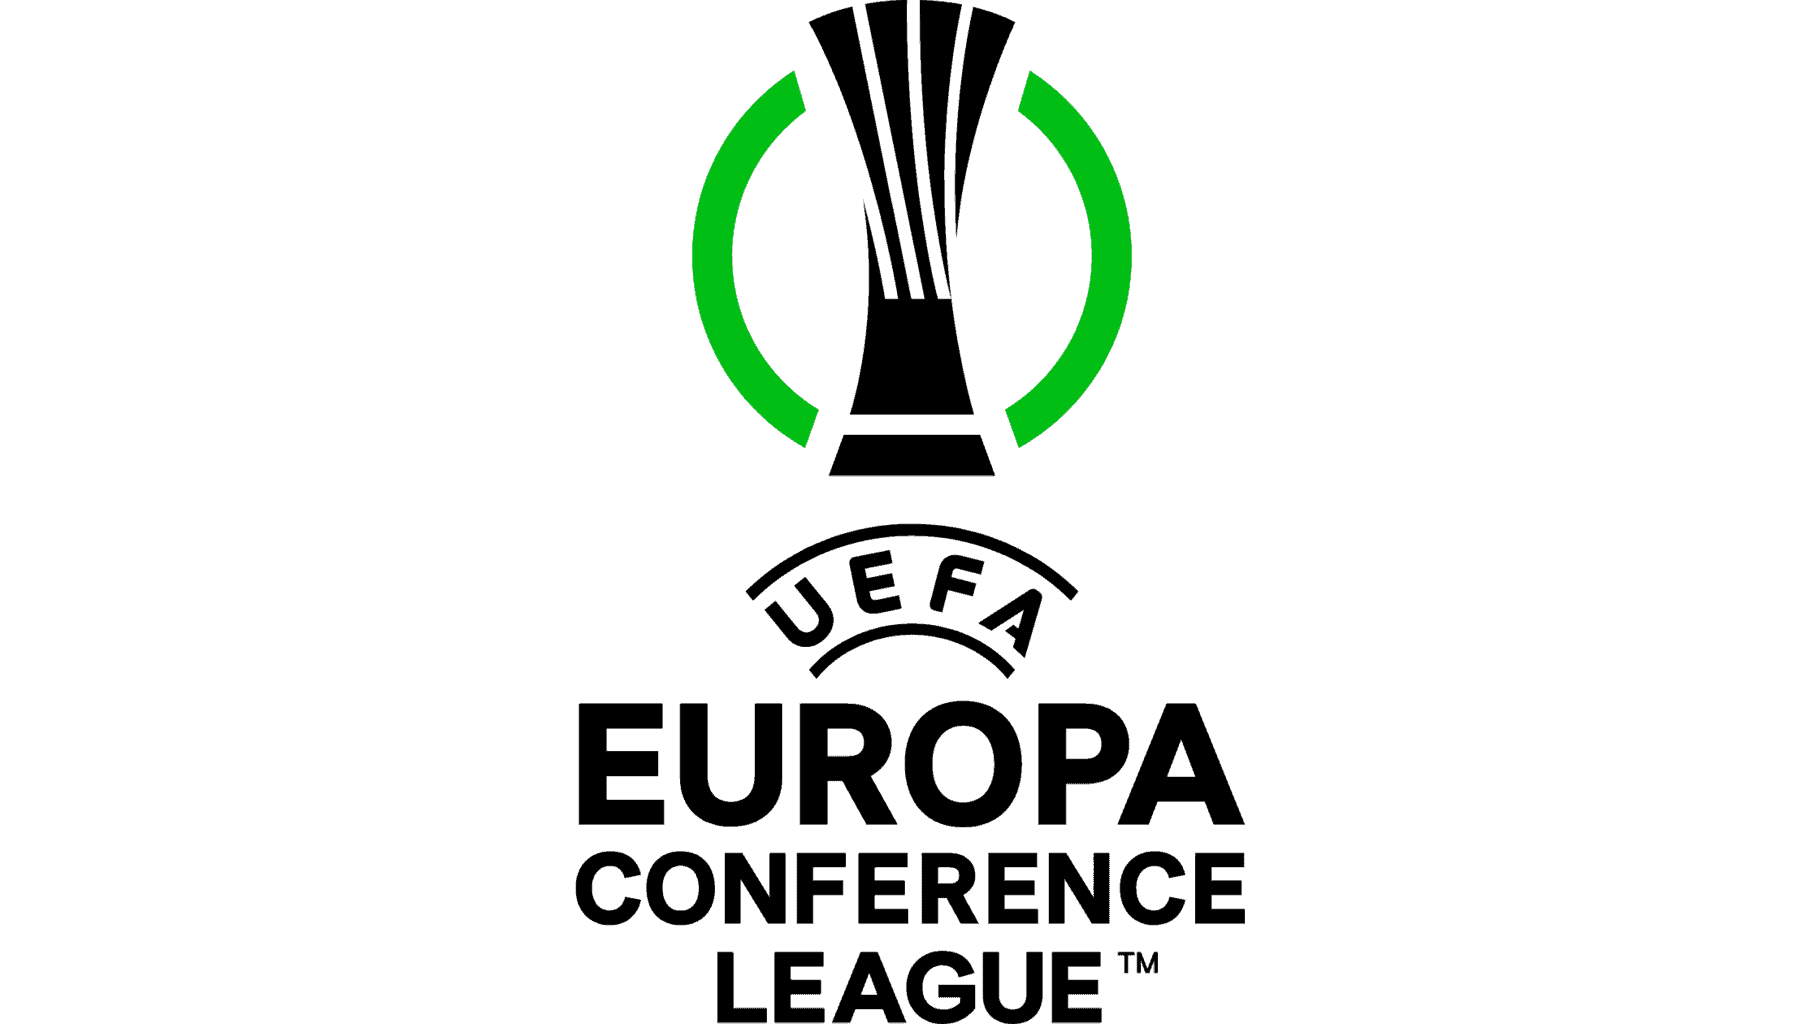 What is the UEFA Europa Conference League?